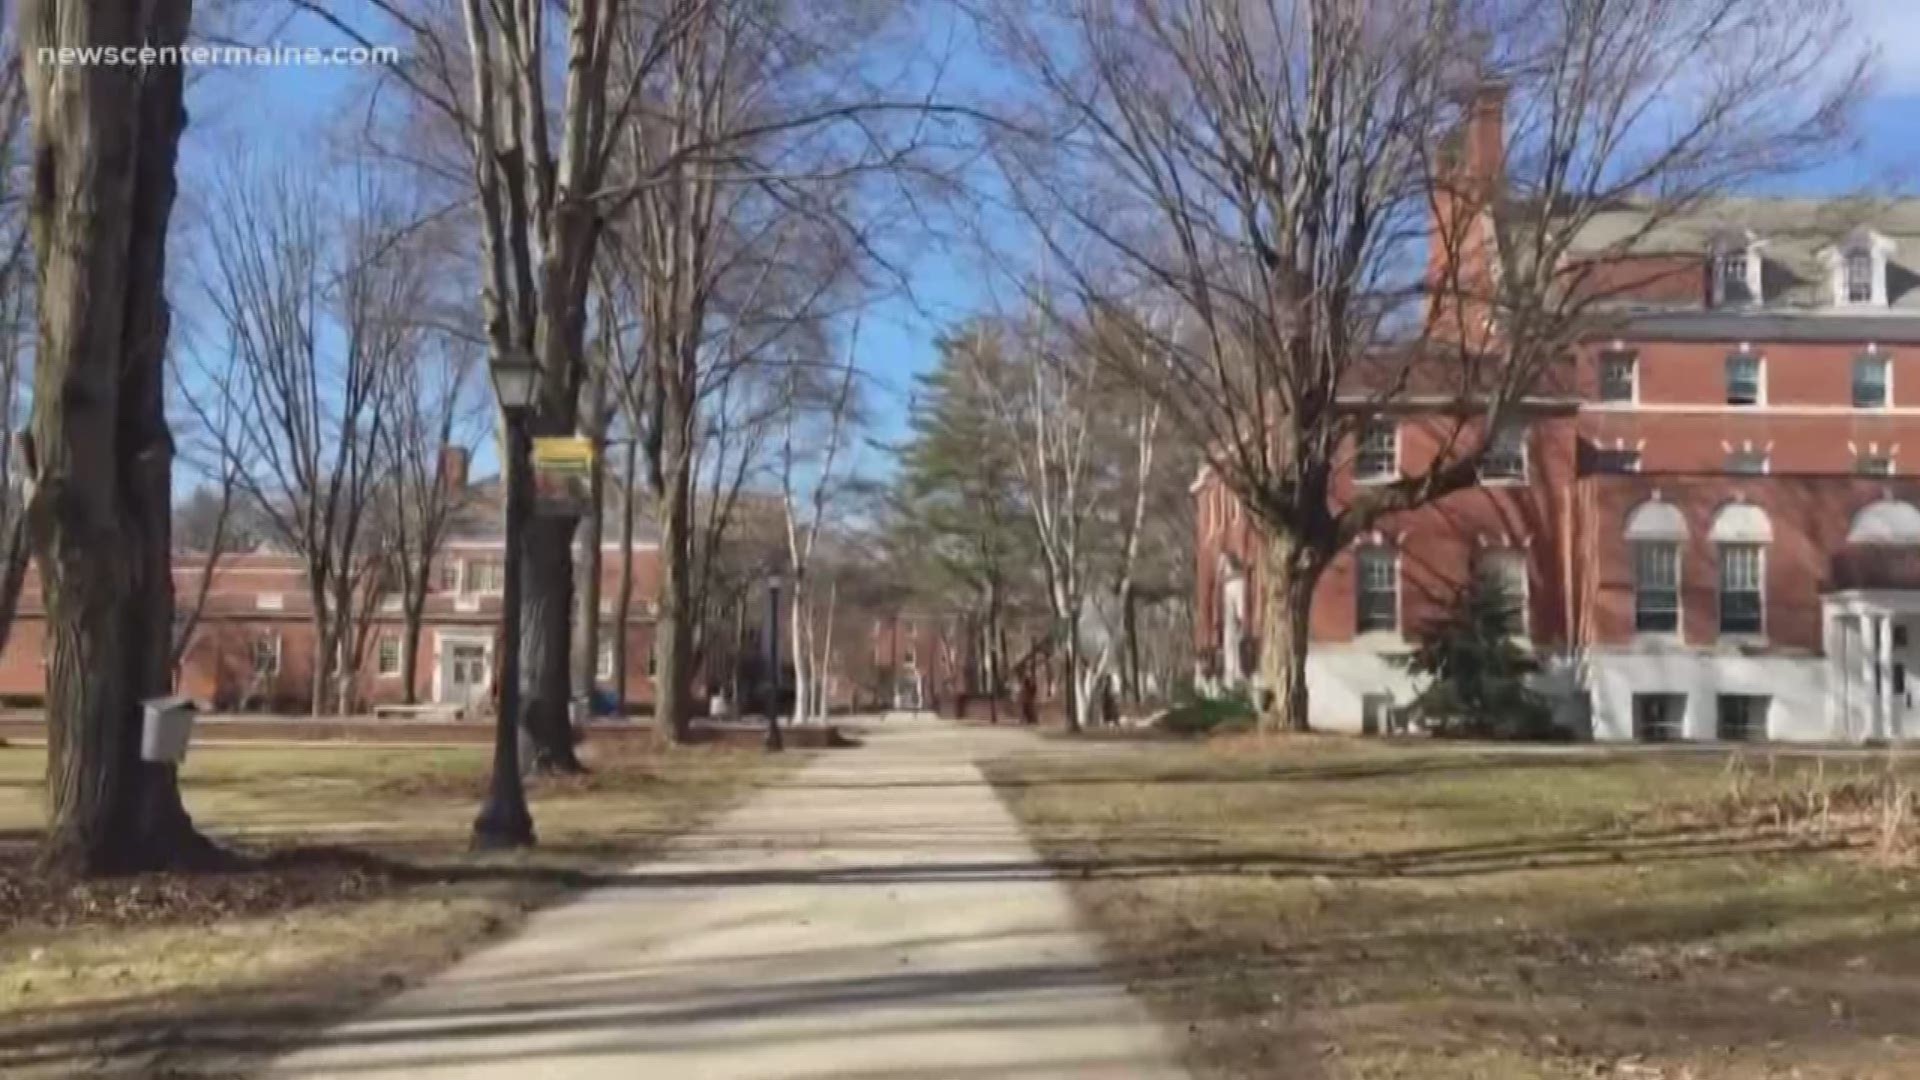 Thousands of students in New England are being affected as six colleges either close or join in mergers.